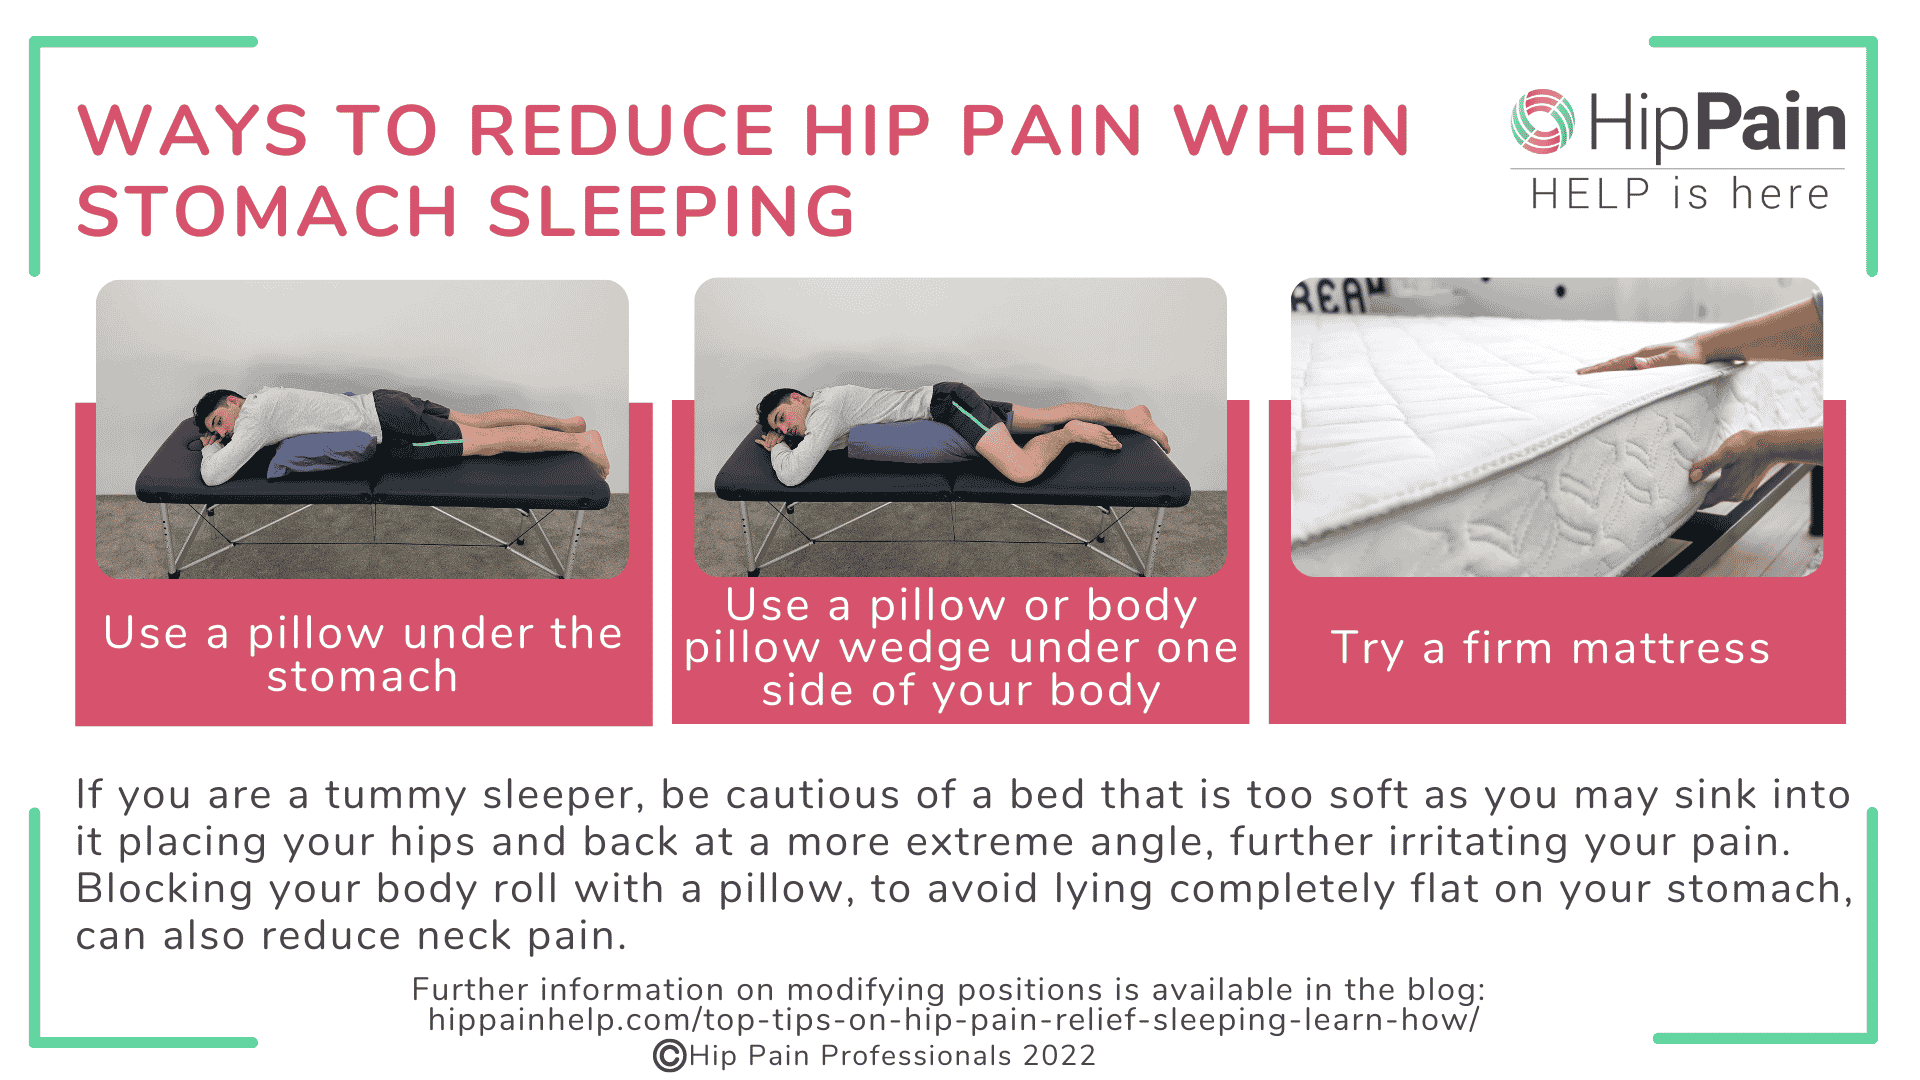 Top Tips on Hip Pain Relief Sleeping. Learn How